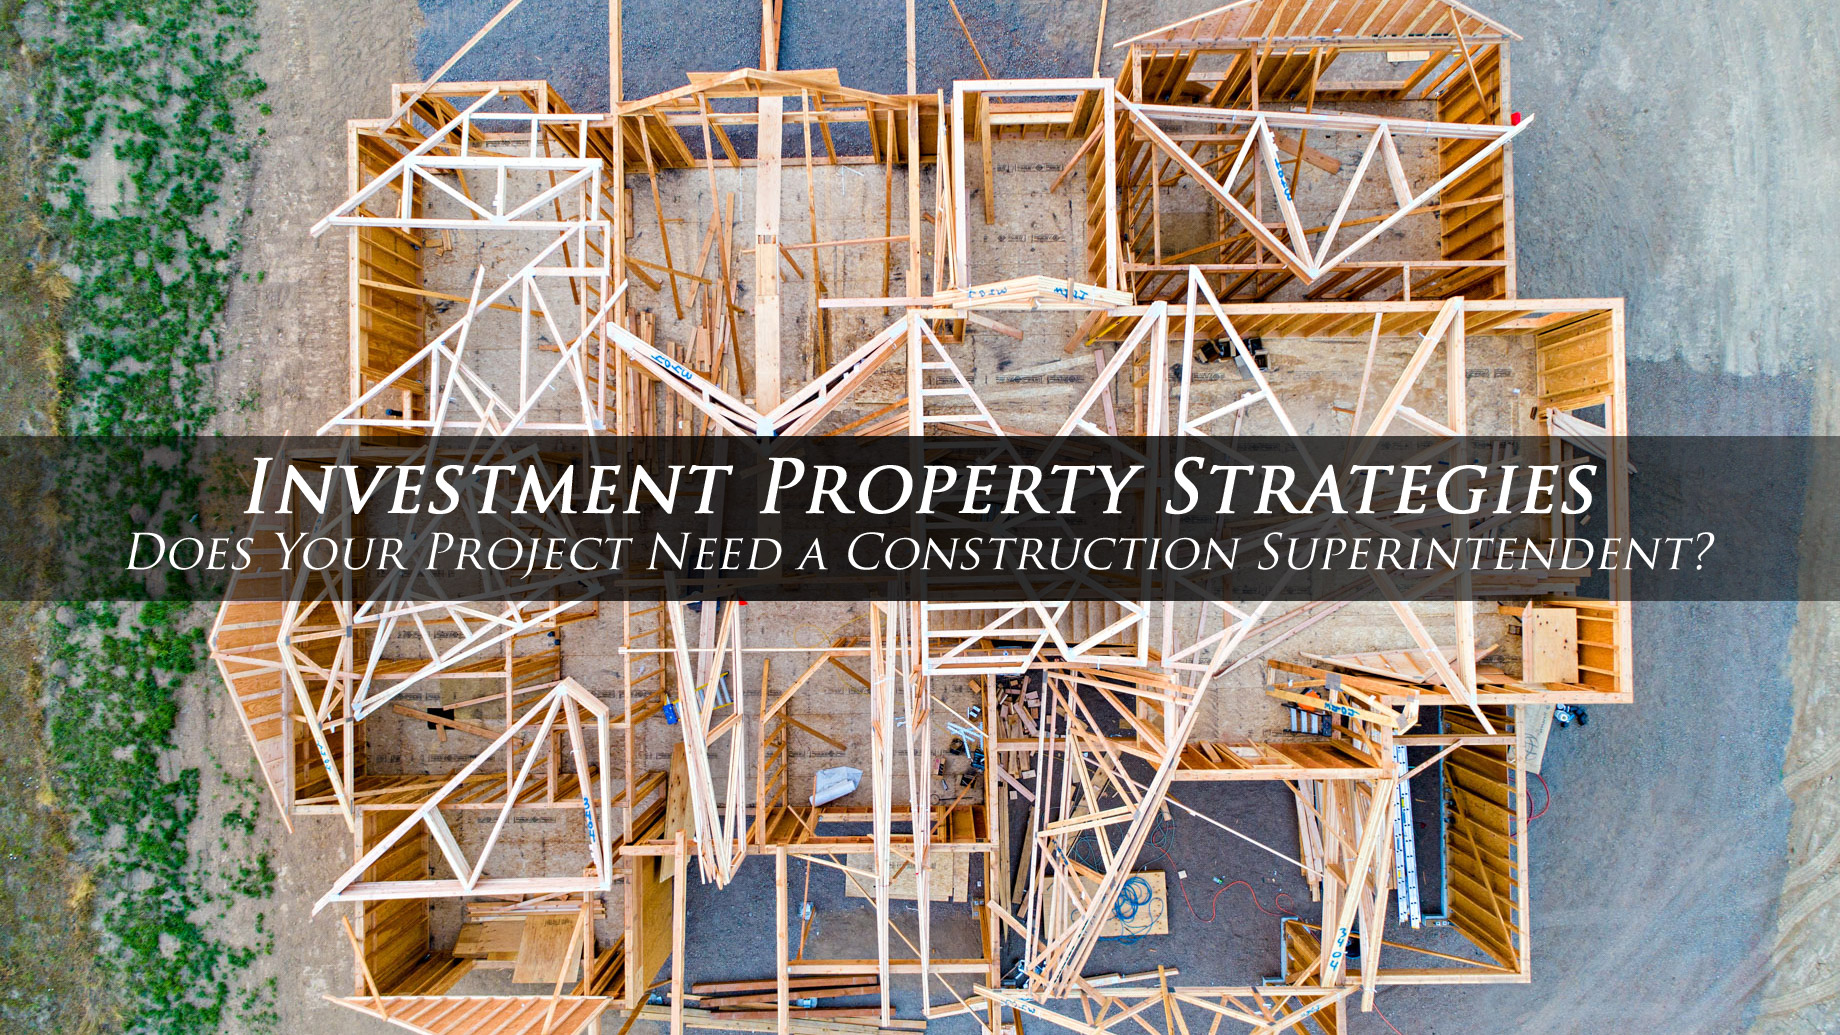 Investment Property Strategies - Does Your Project Need a Construction Superintendent?